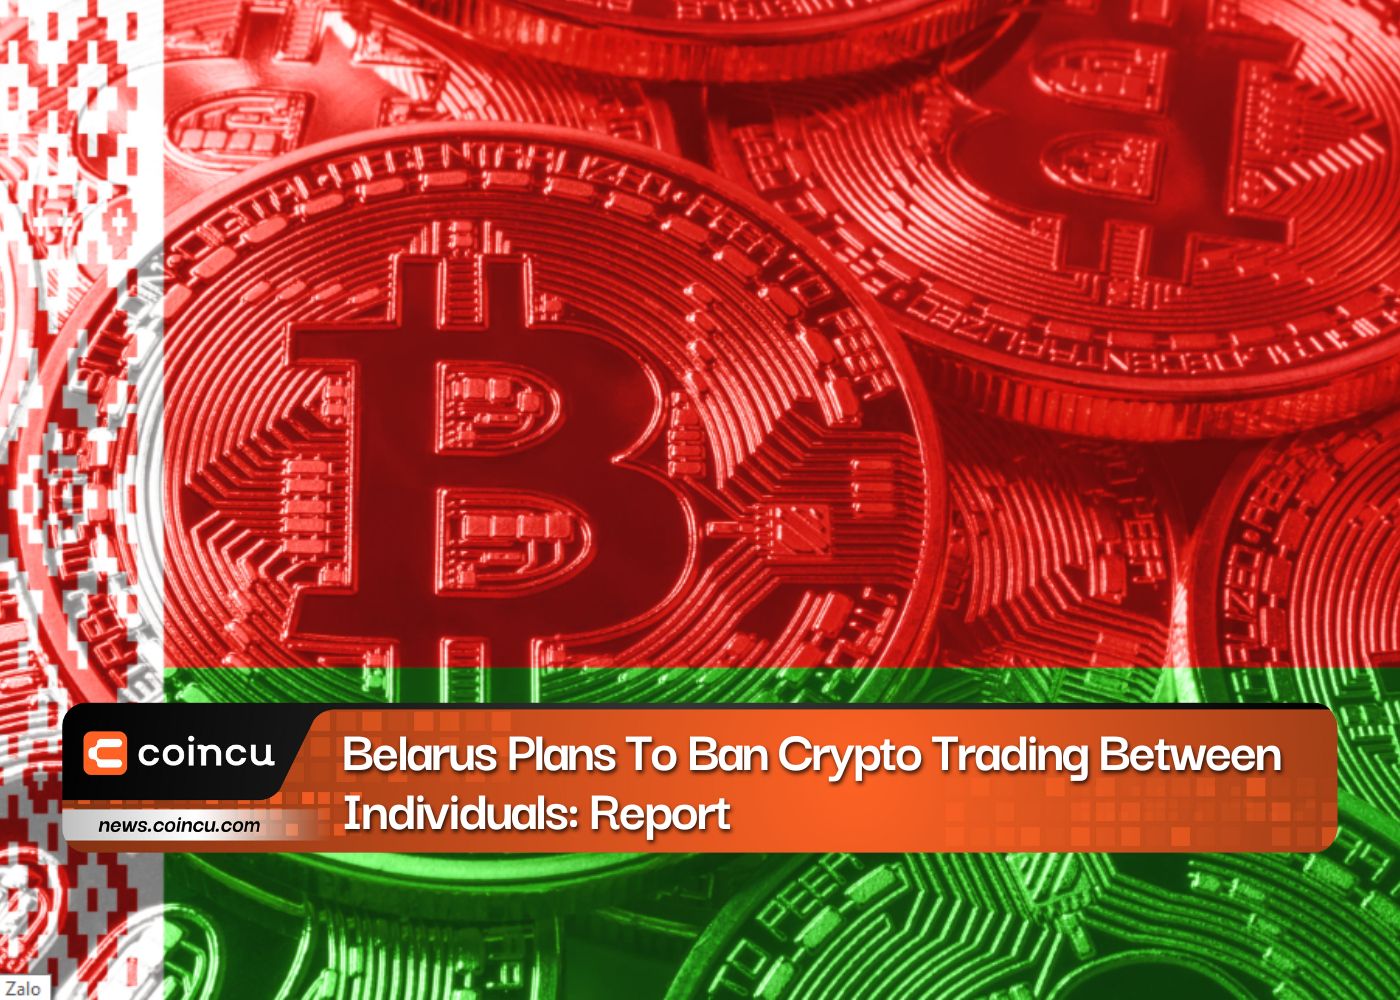 Belarus Plans To Ban Crypto Trading Between Individuals: Report